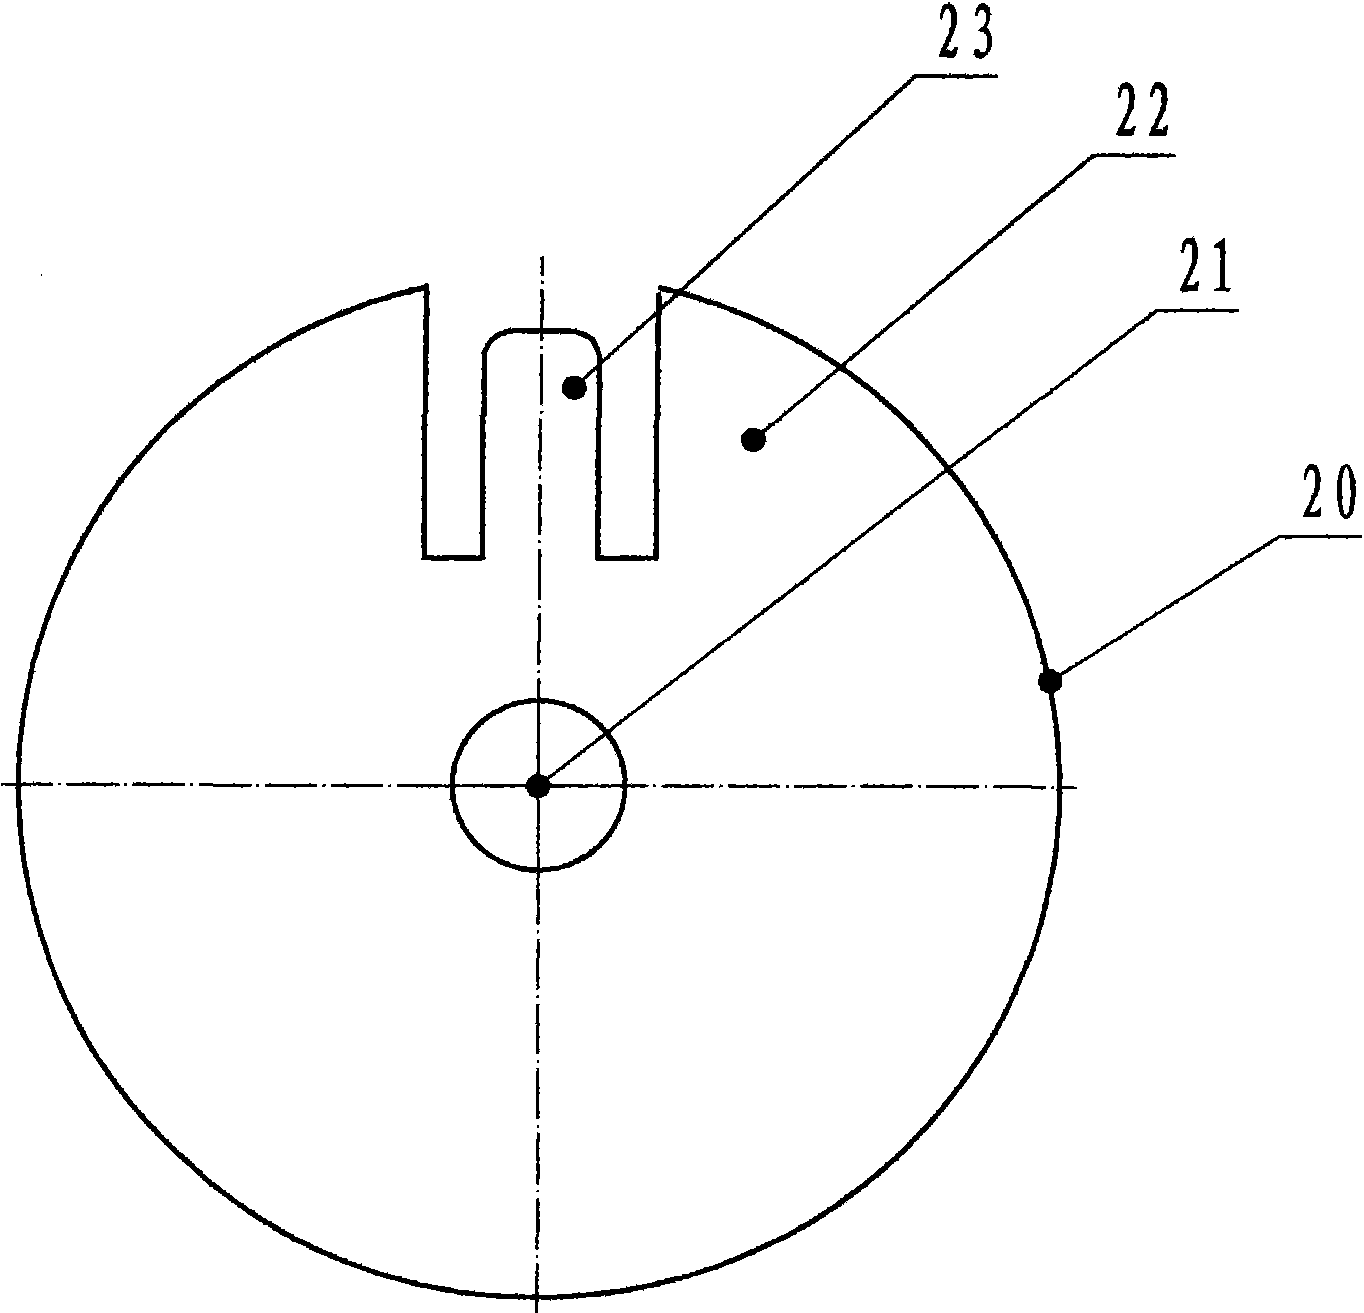 Generator with continuous variable volume compression ratio